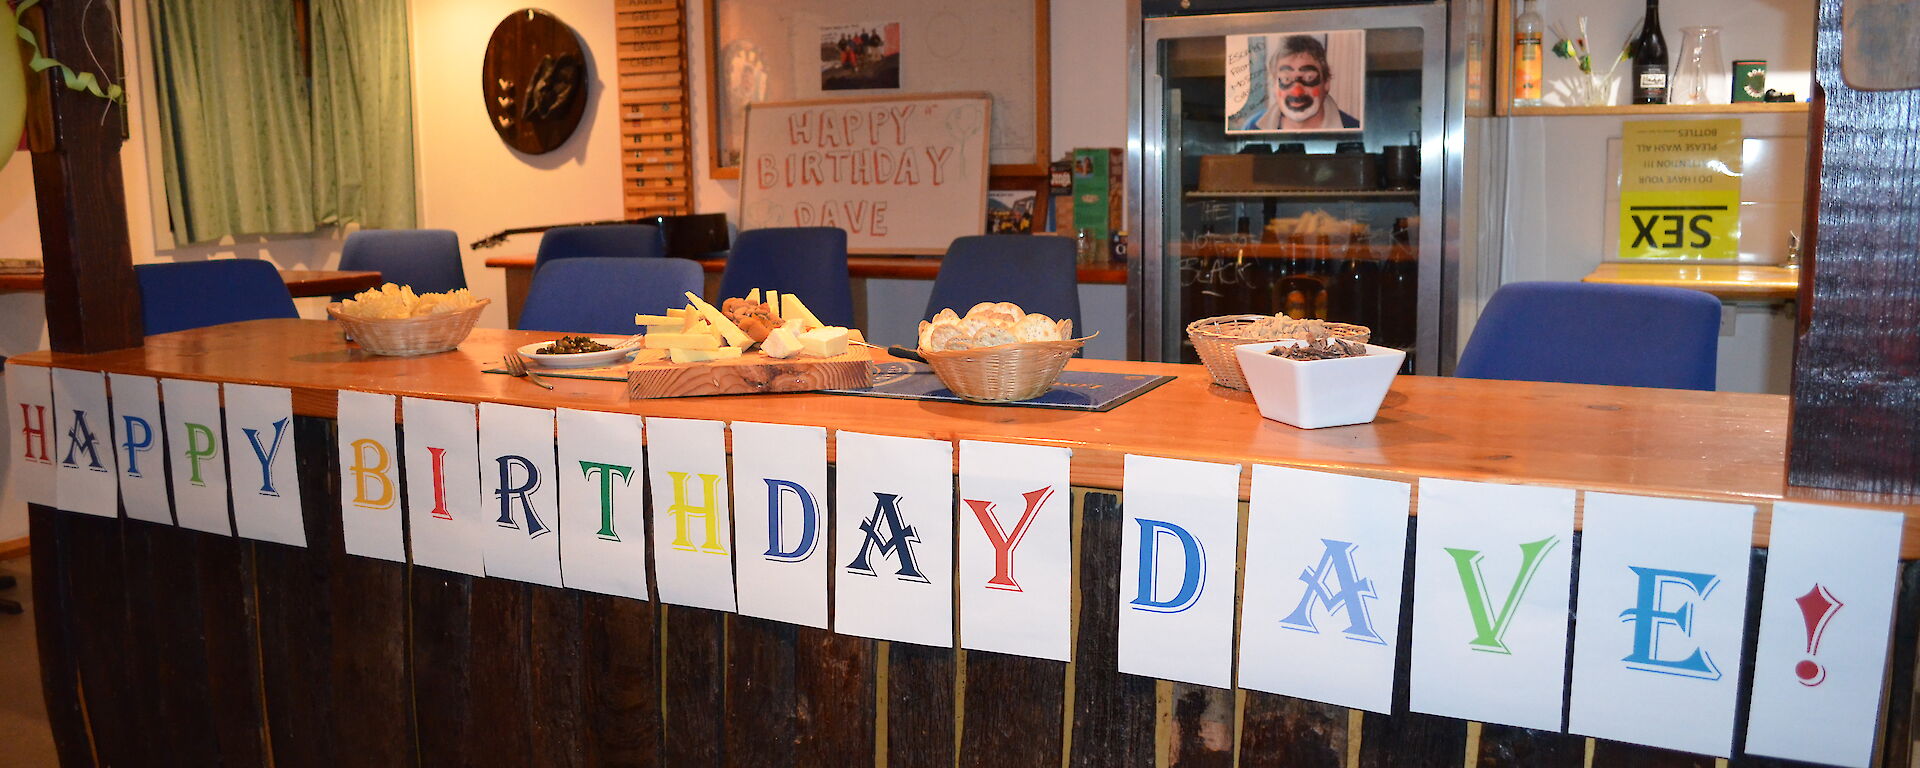 Celebrating Dave’s birthday — The Macca bar area adorned with decorations with a frieze of letters across the front edge of the bar spelling ‘Happy Birthday Dave!'